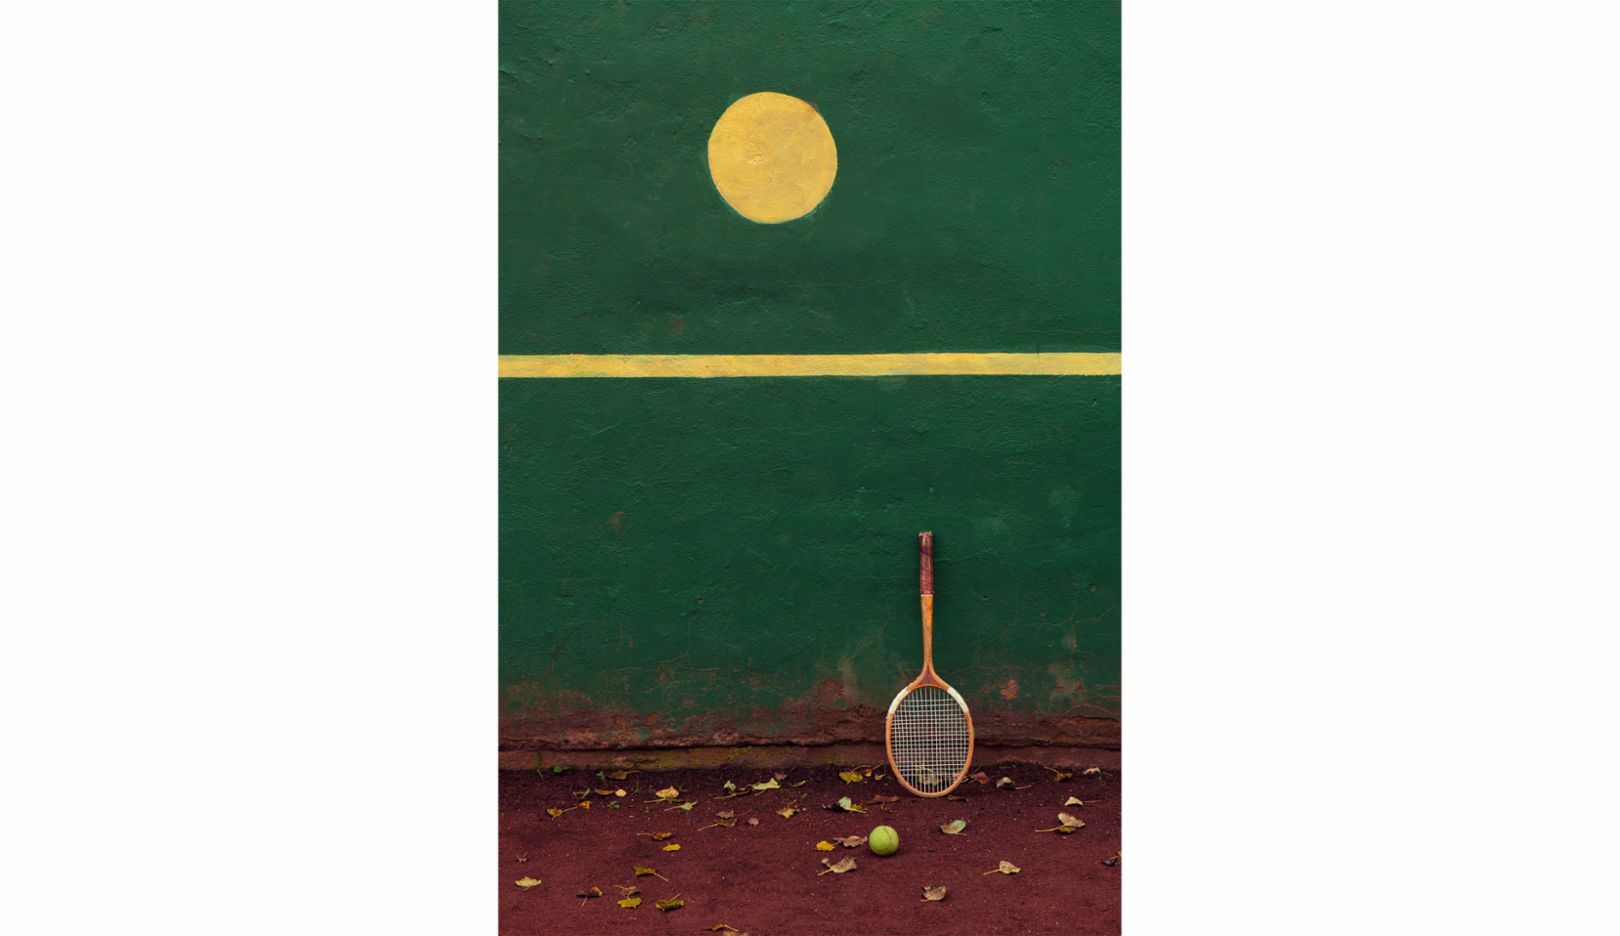 “When I was photographing Barbora Strýcová, she leaned her racket against the wall during a break,” says Leitmeritz, recalling the shoot in Prague. “I really like those old training walls with their markings. For me, they have their very own aesthetics. And that’s how this still life came about on a warm fall day.”